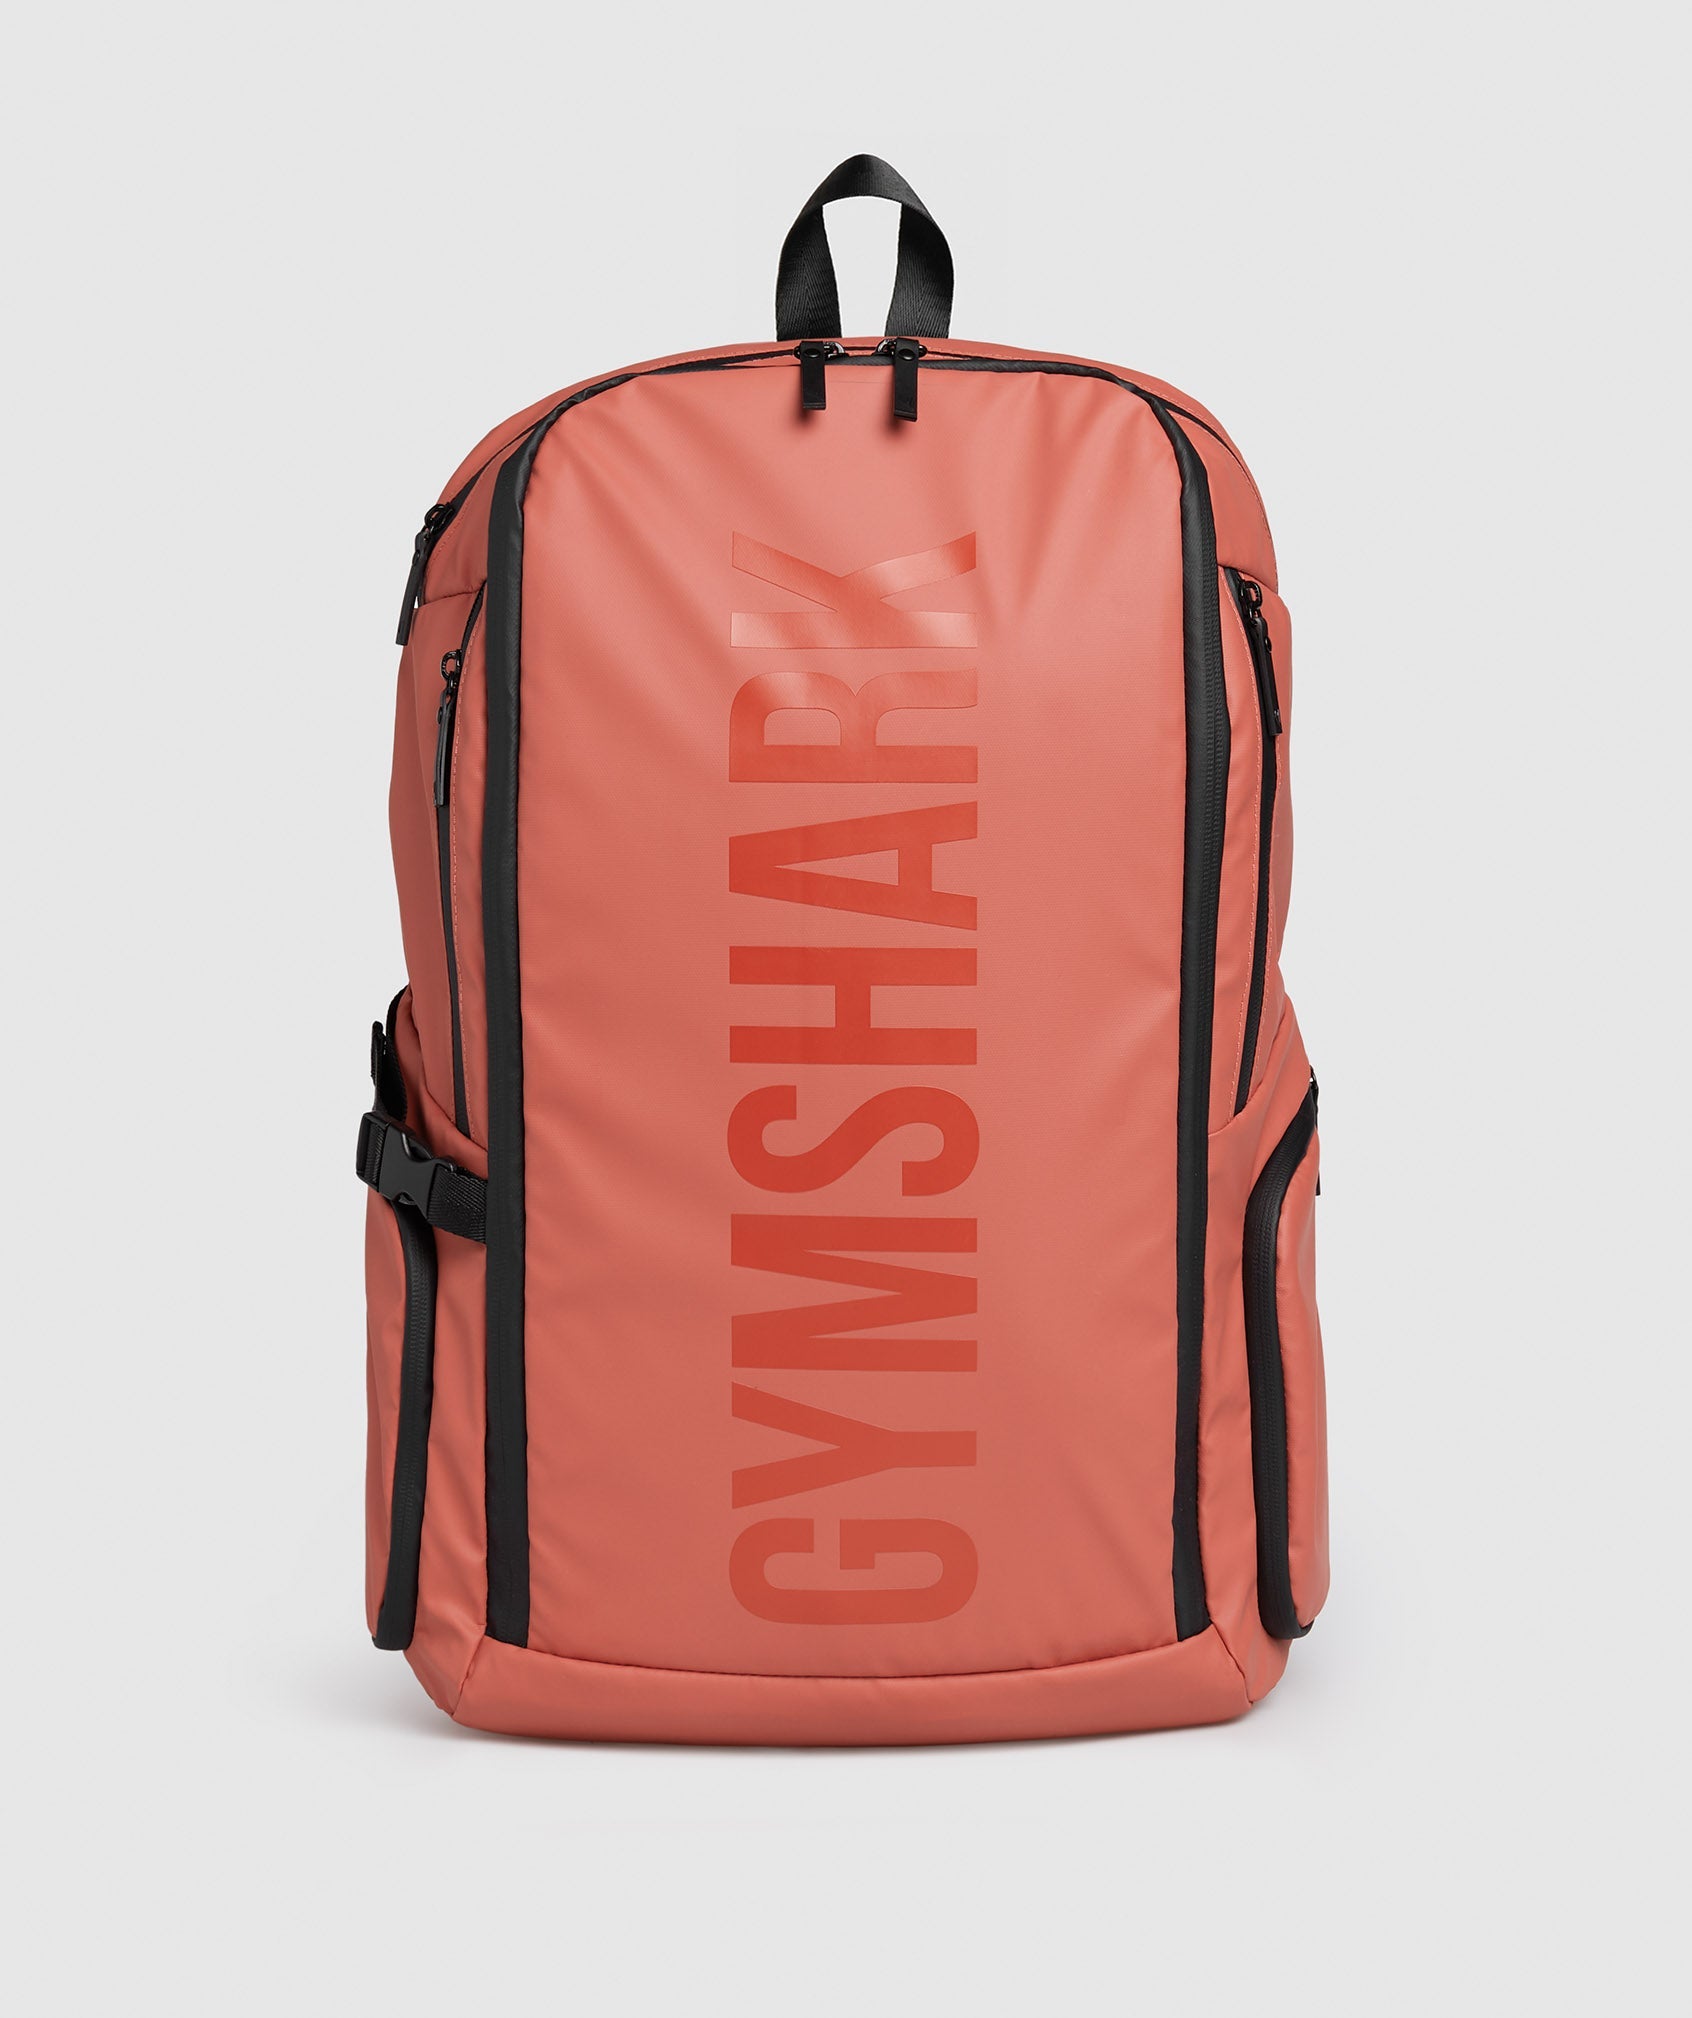 X-Series 0.3 Backpack in Persimmon Red